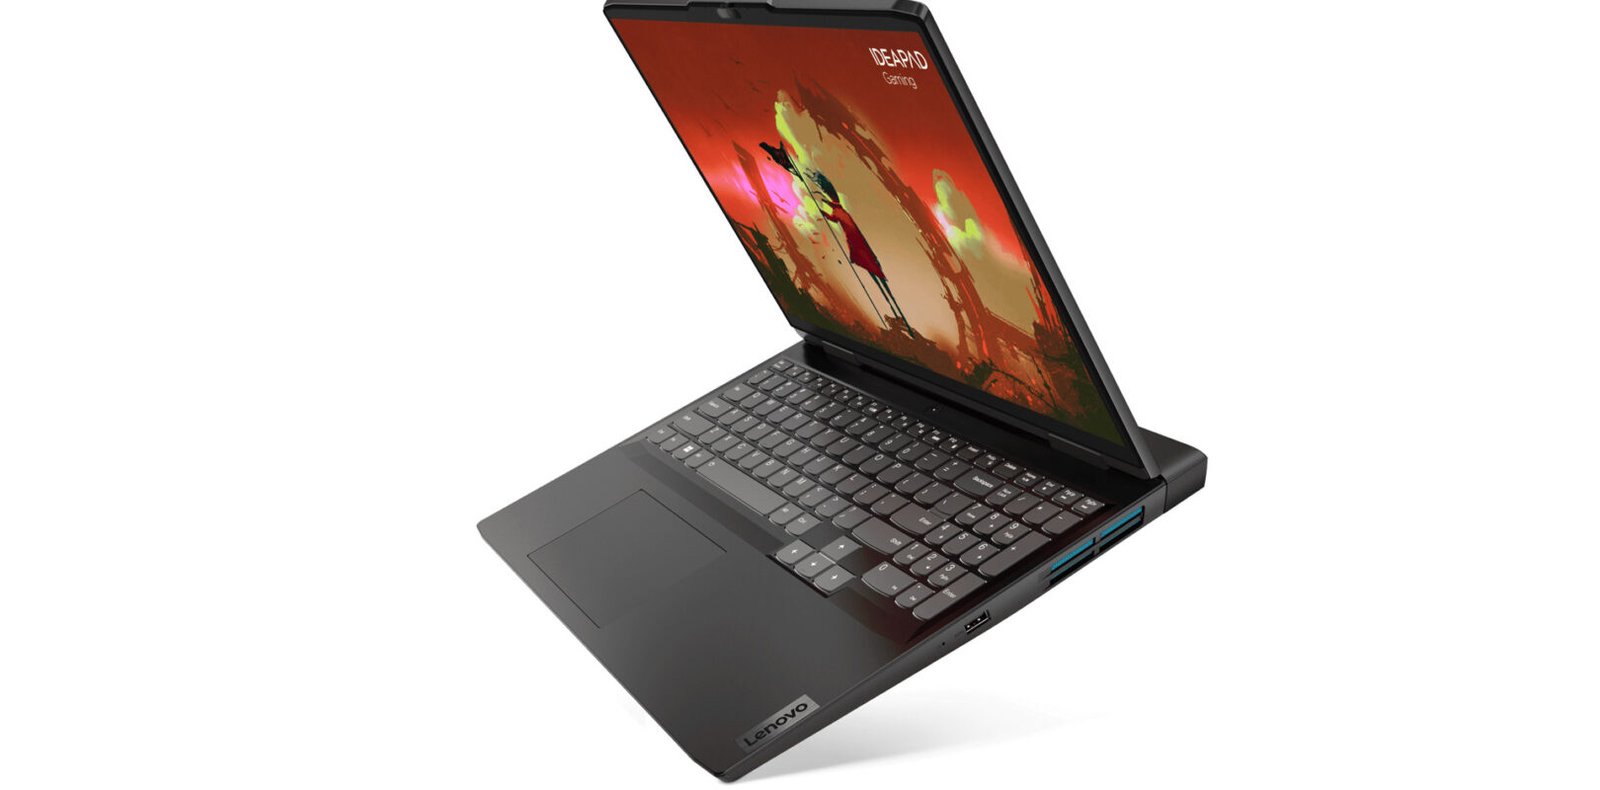 Lenovo launches the IdeaPad Gaming 3i and IdeaPad Gaming 3 laptop series,  featuring 12th Gen Intel H-series or AMD Ryzen 6000 chipsets